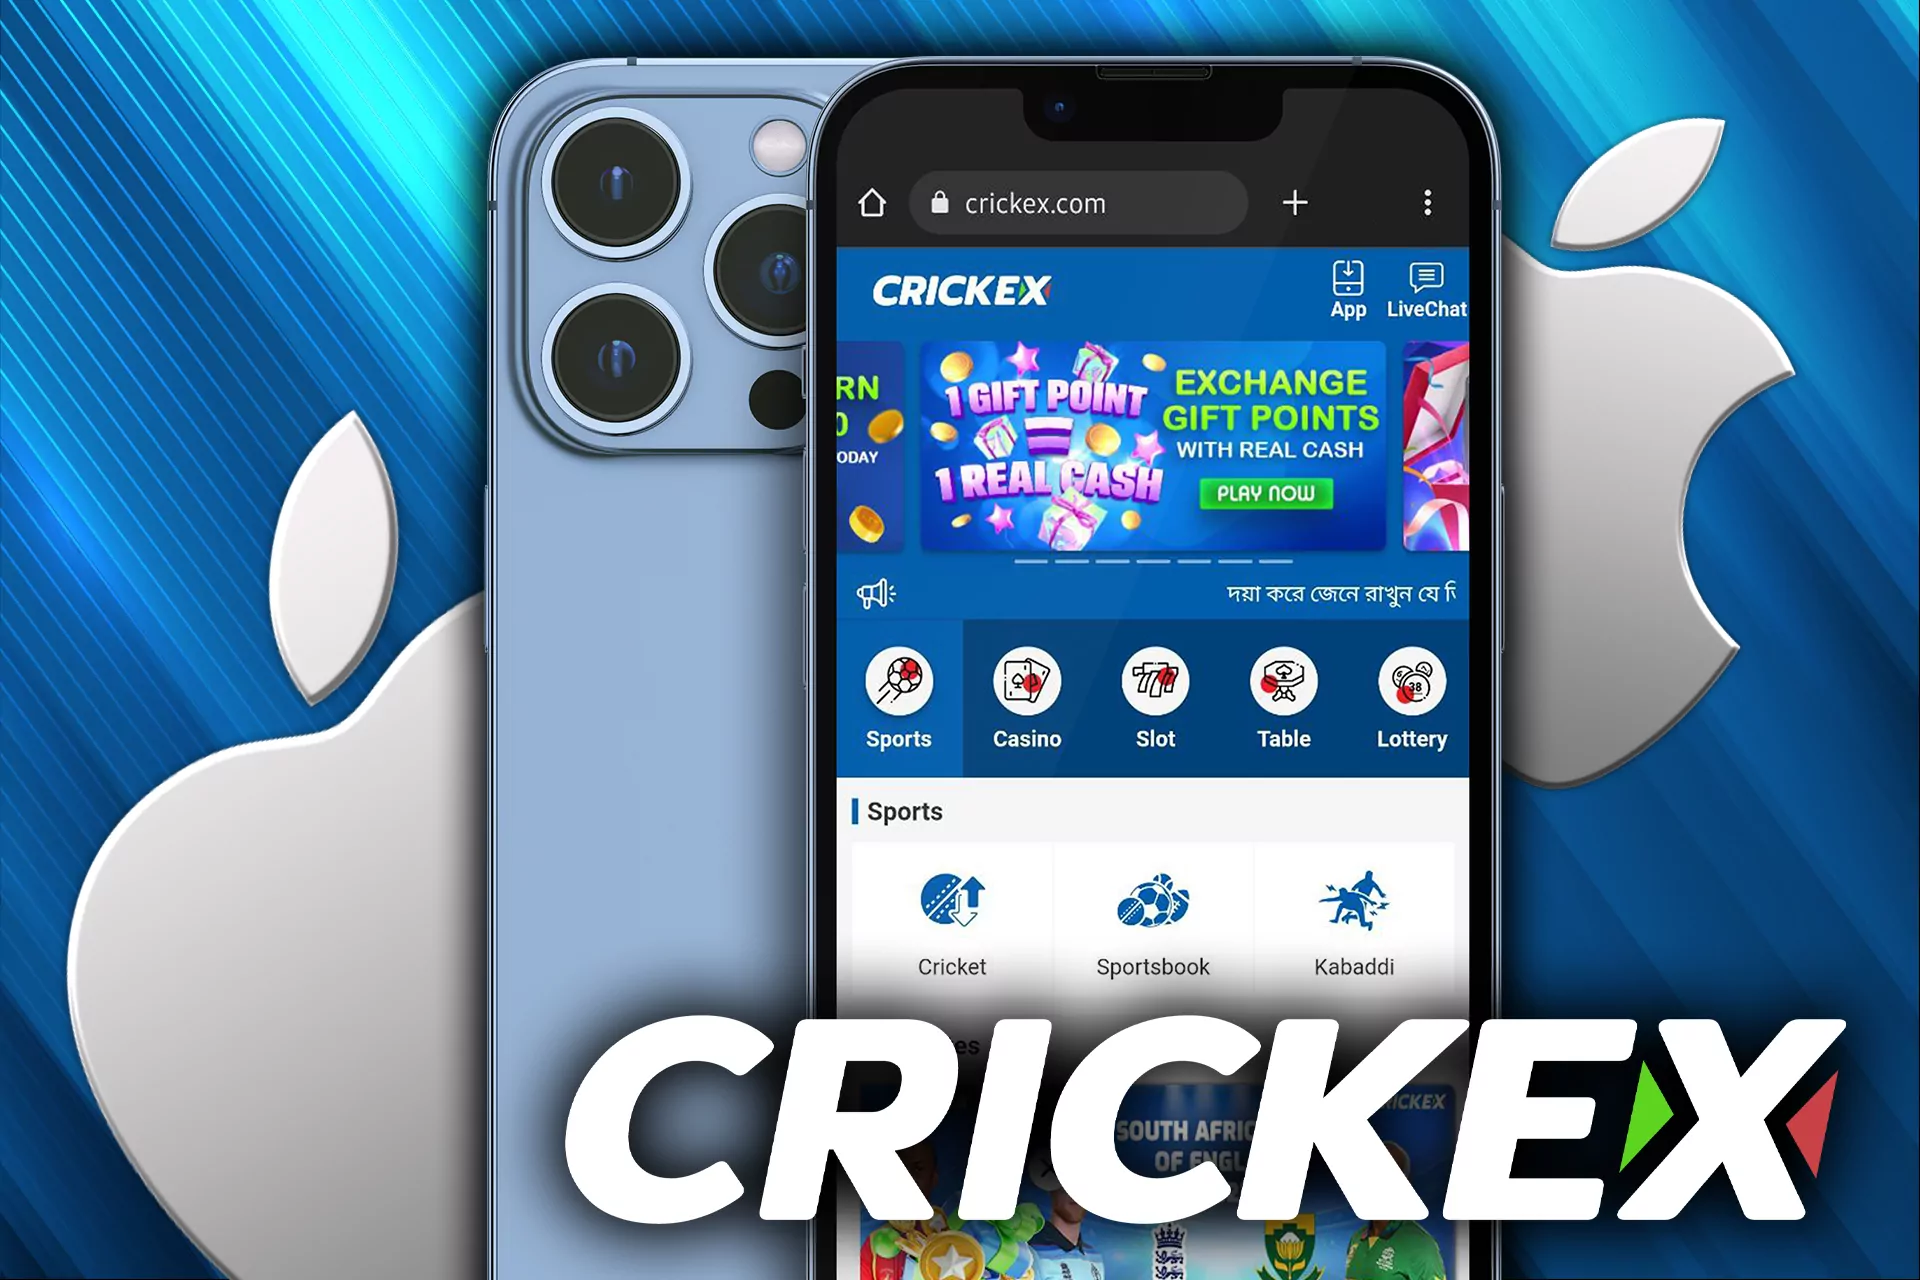 You can use browser version of Crickex on your iPhone, that has the same features.